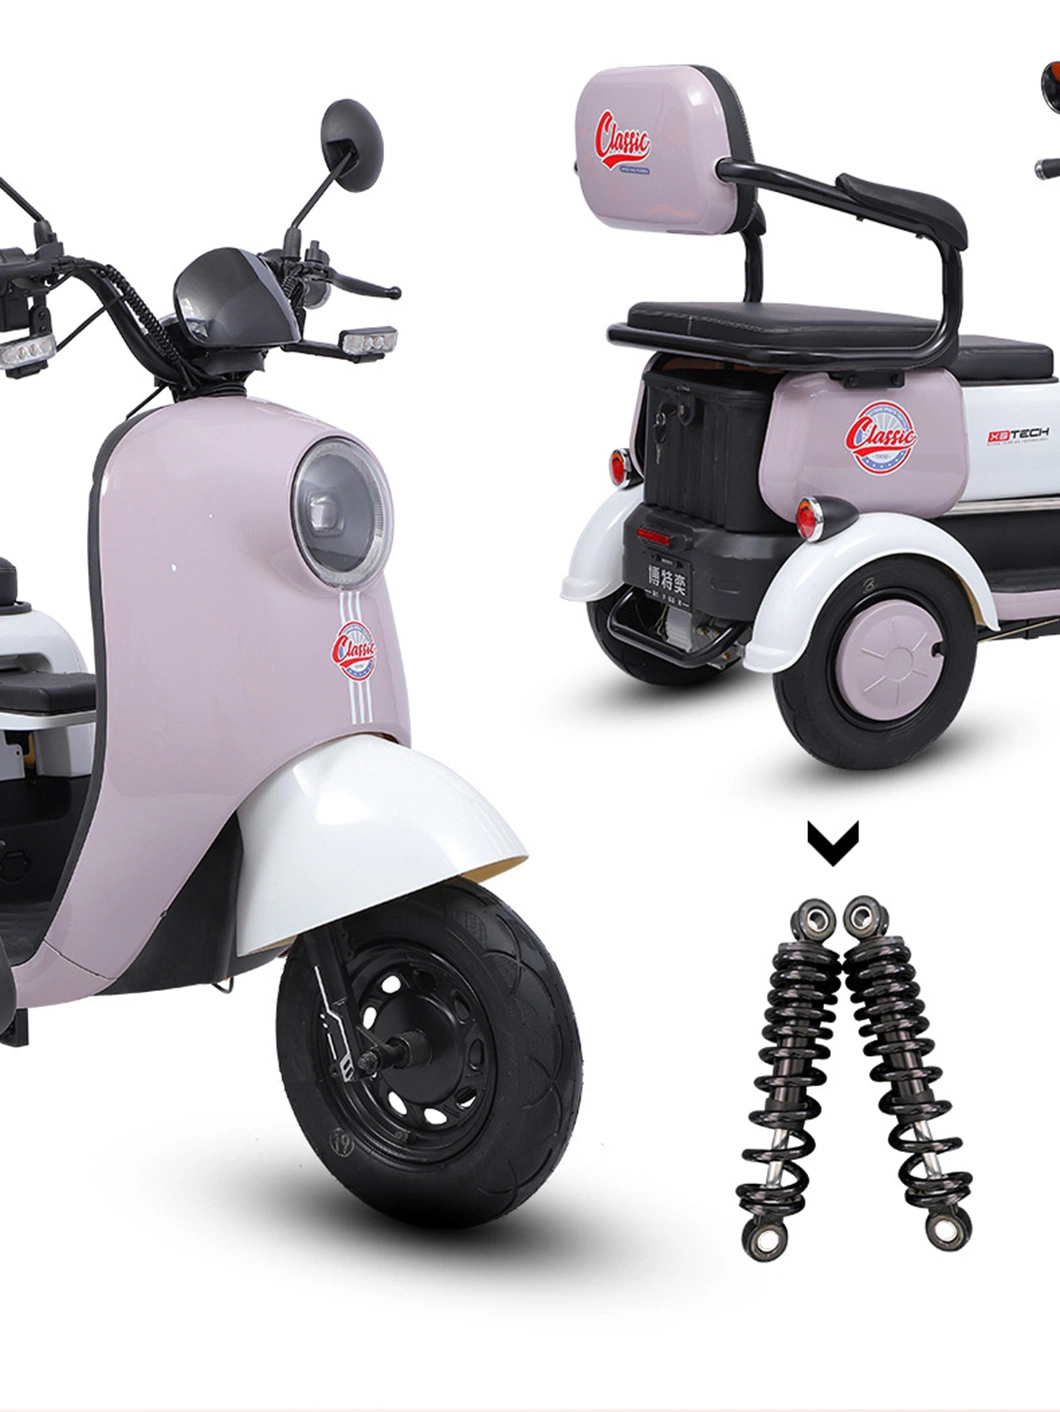 2023 Updated Style 800W Three Wheels Electric Elderly Mobility Scooter Big Power Electric Tricycle on Sale